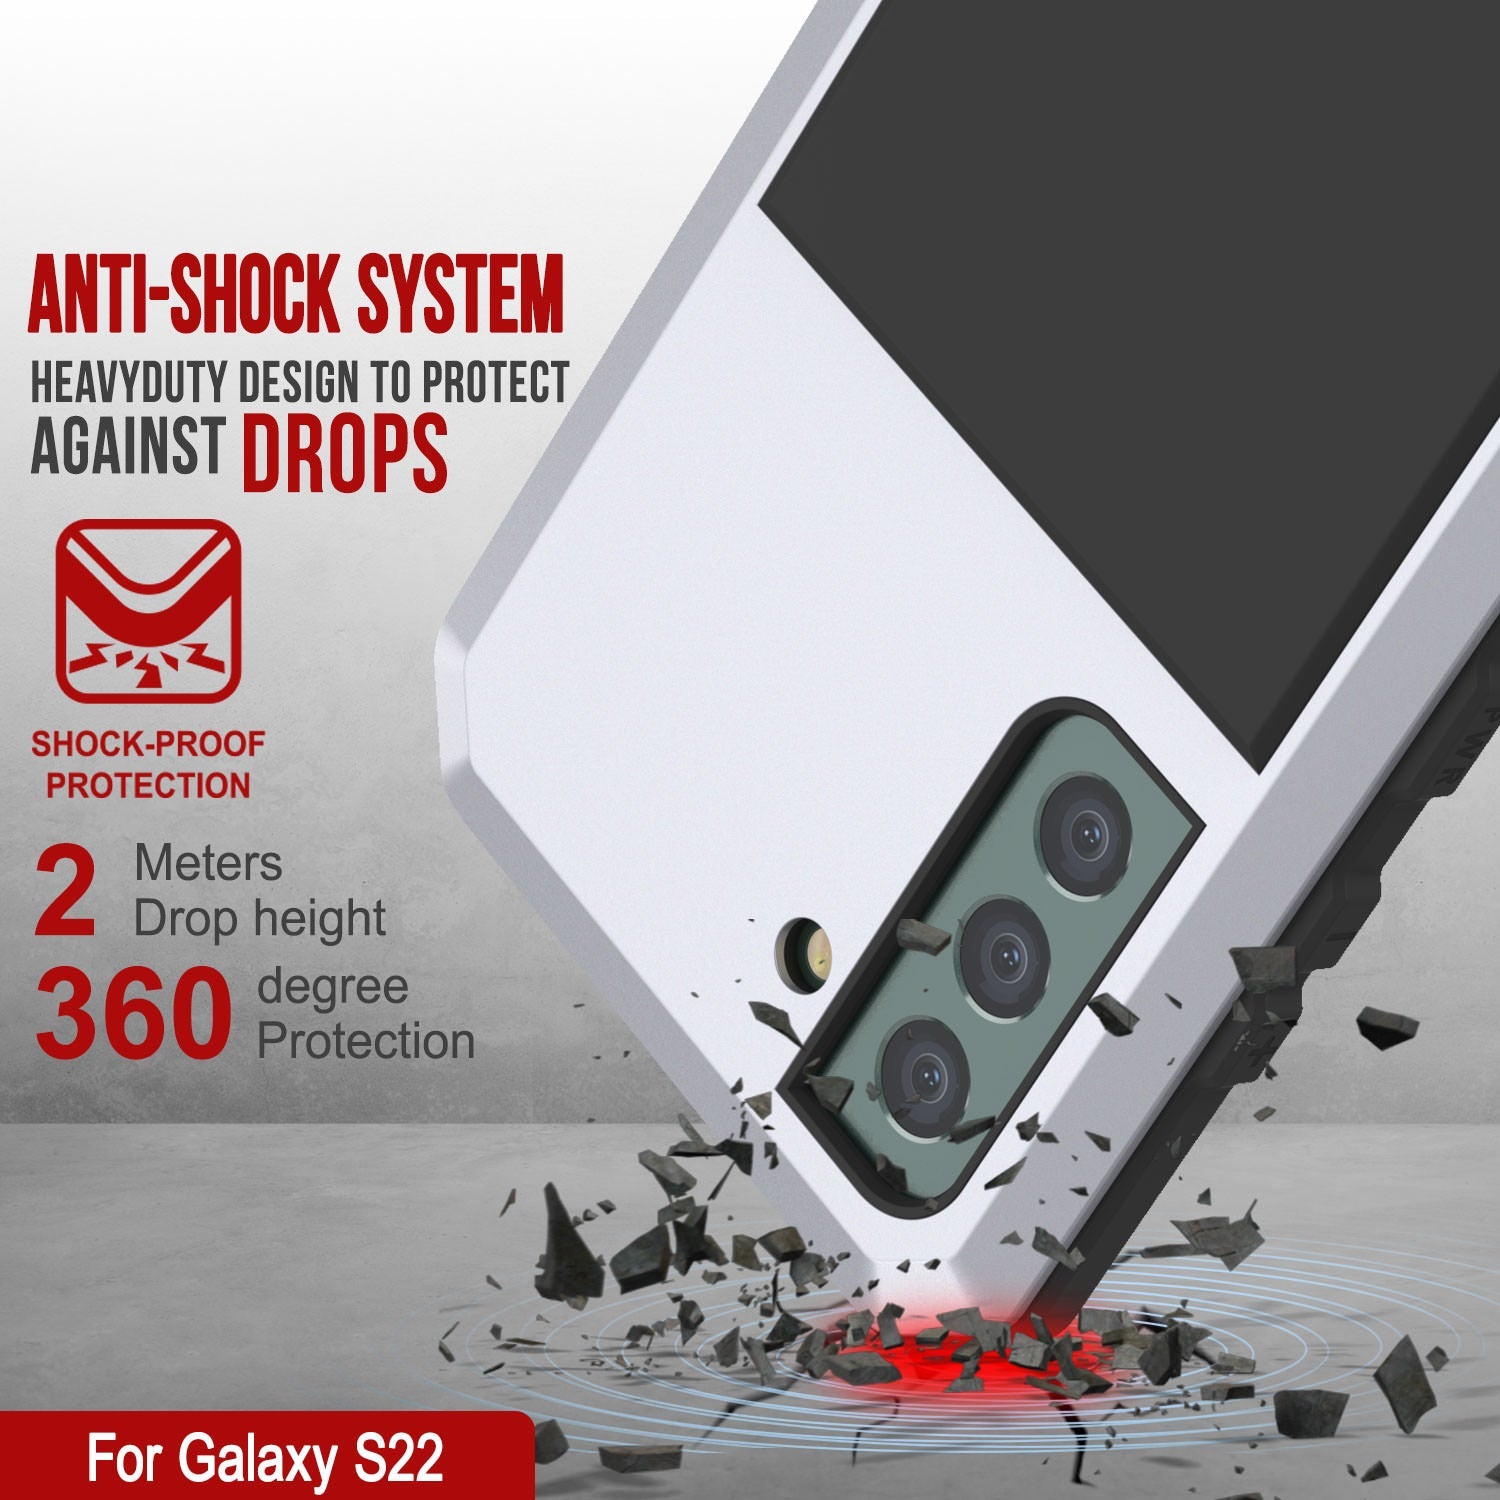 Galaxy S22 Metal Case, Heavy Duty Military Grade Rugged Armor Cover [White]